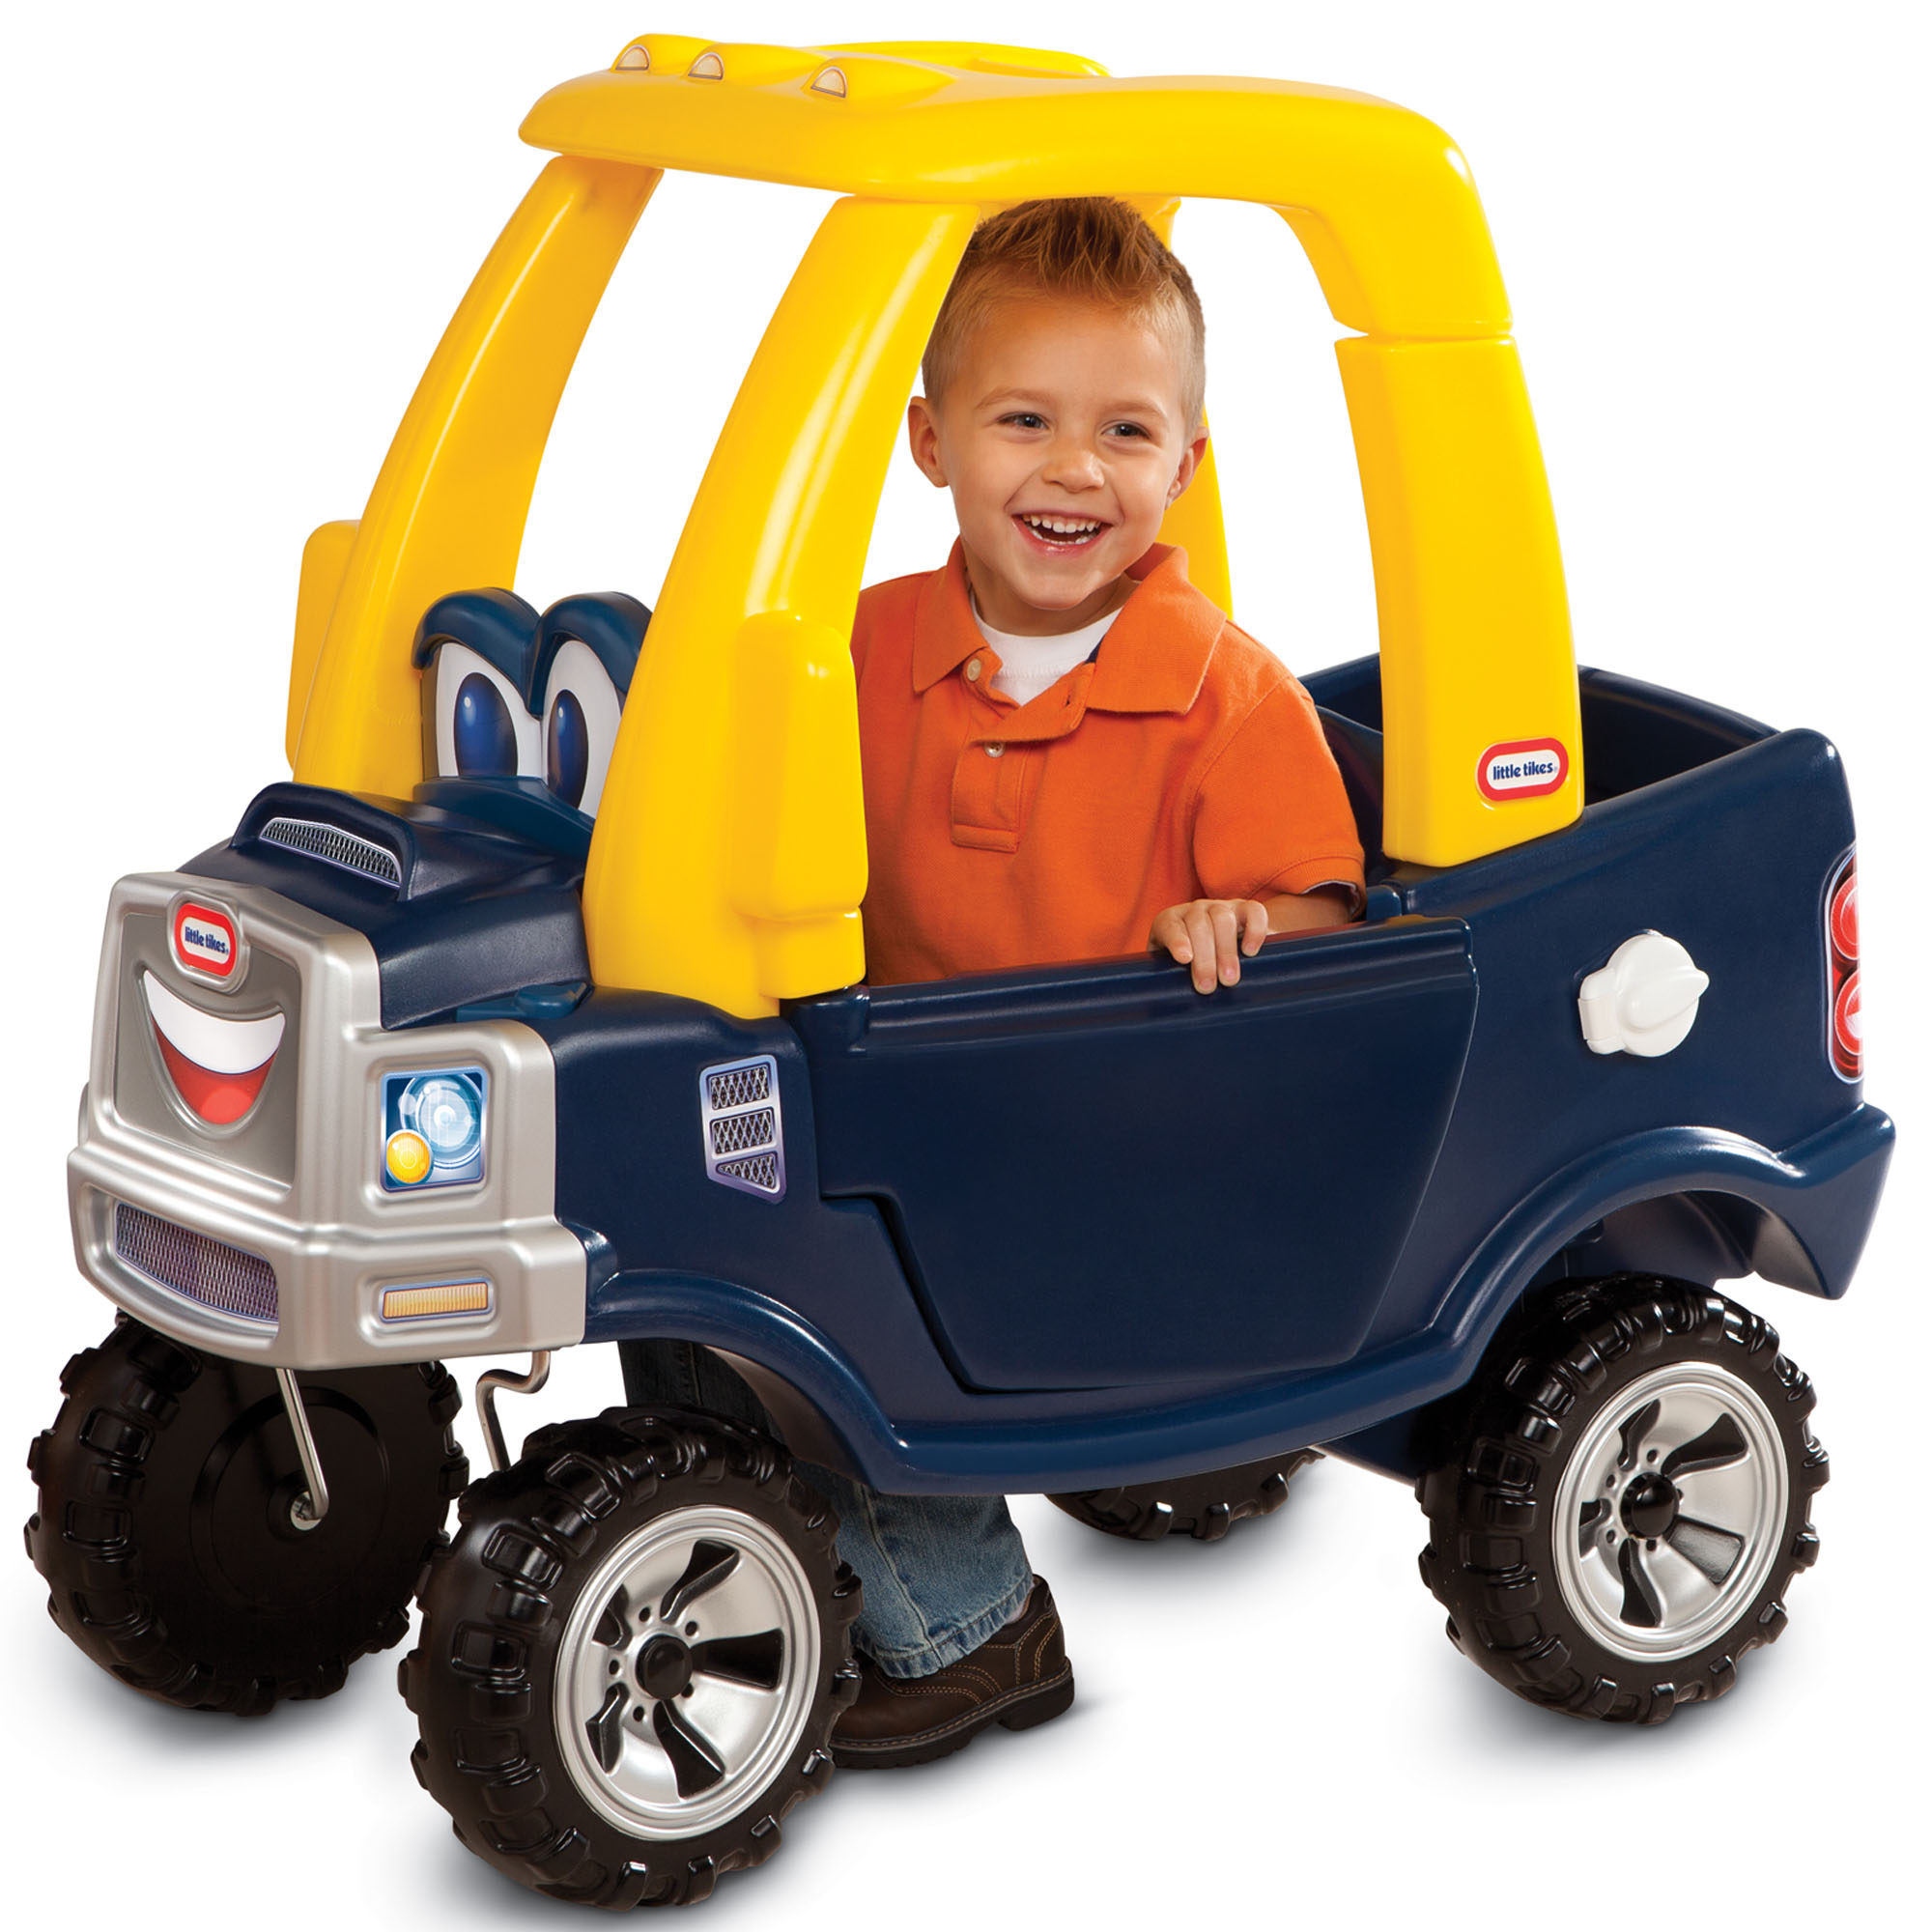 Little Tikes Cozy Truck Ride-on with Removable Floorboard, 18 Months to 5 Years - image 1 of 9